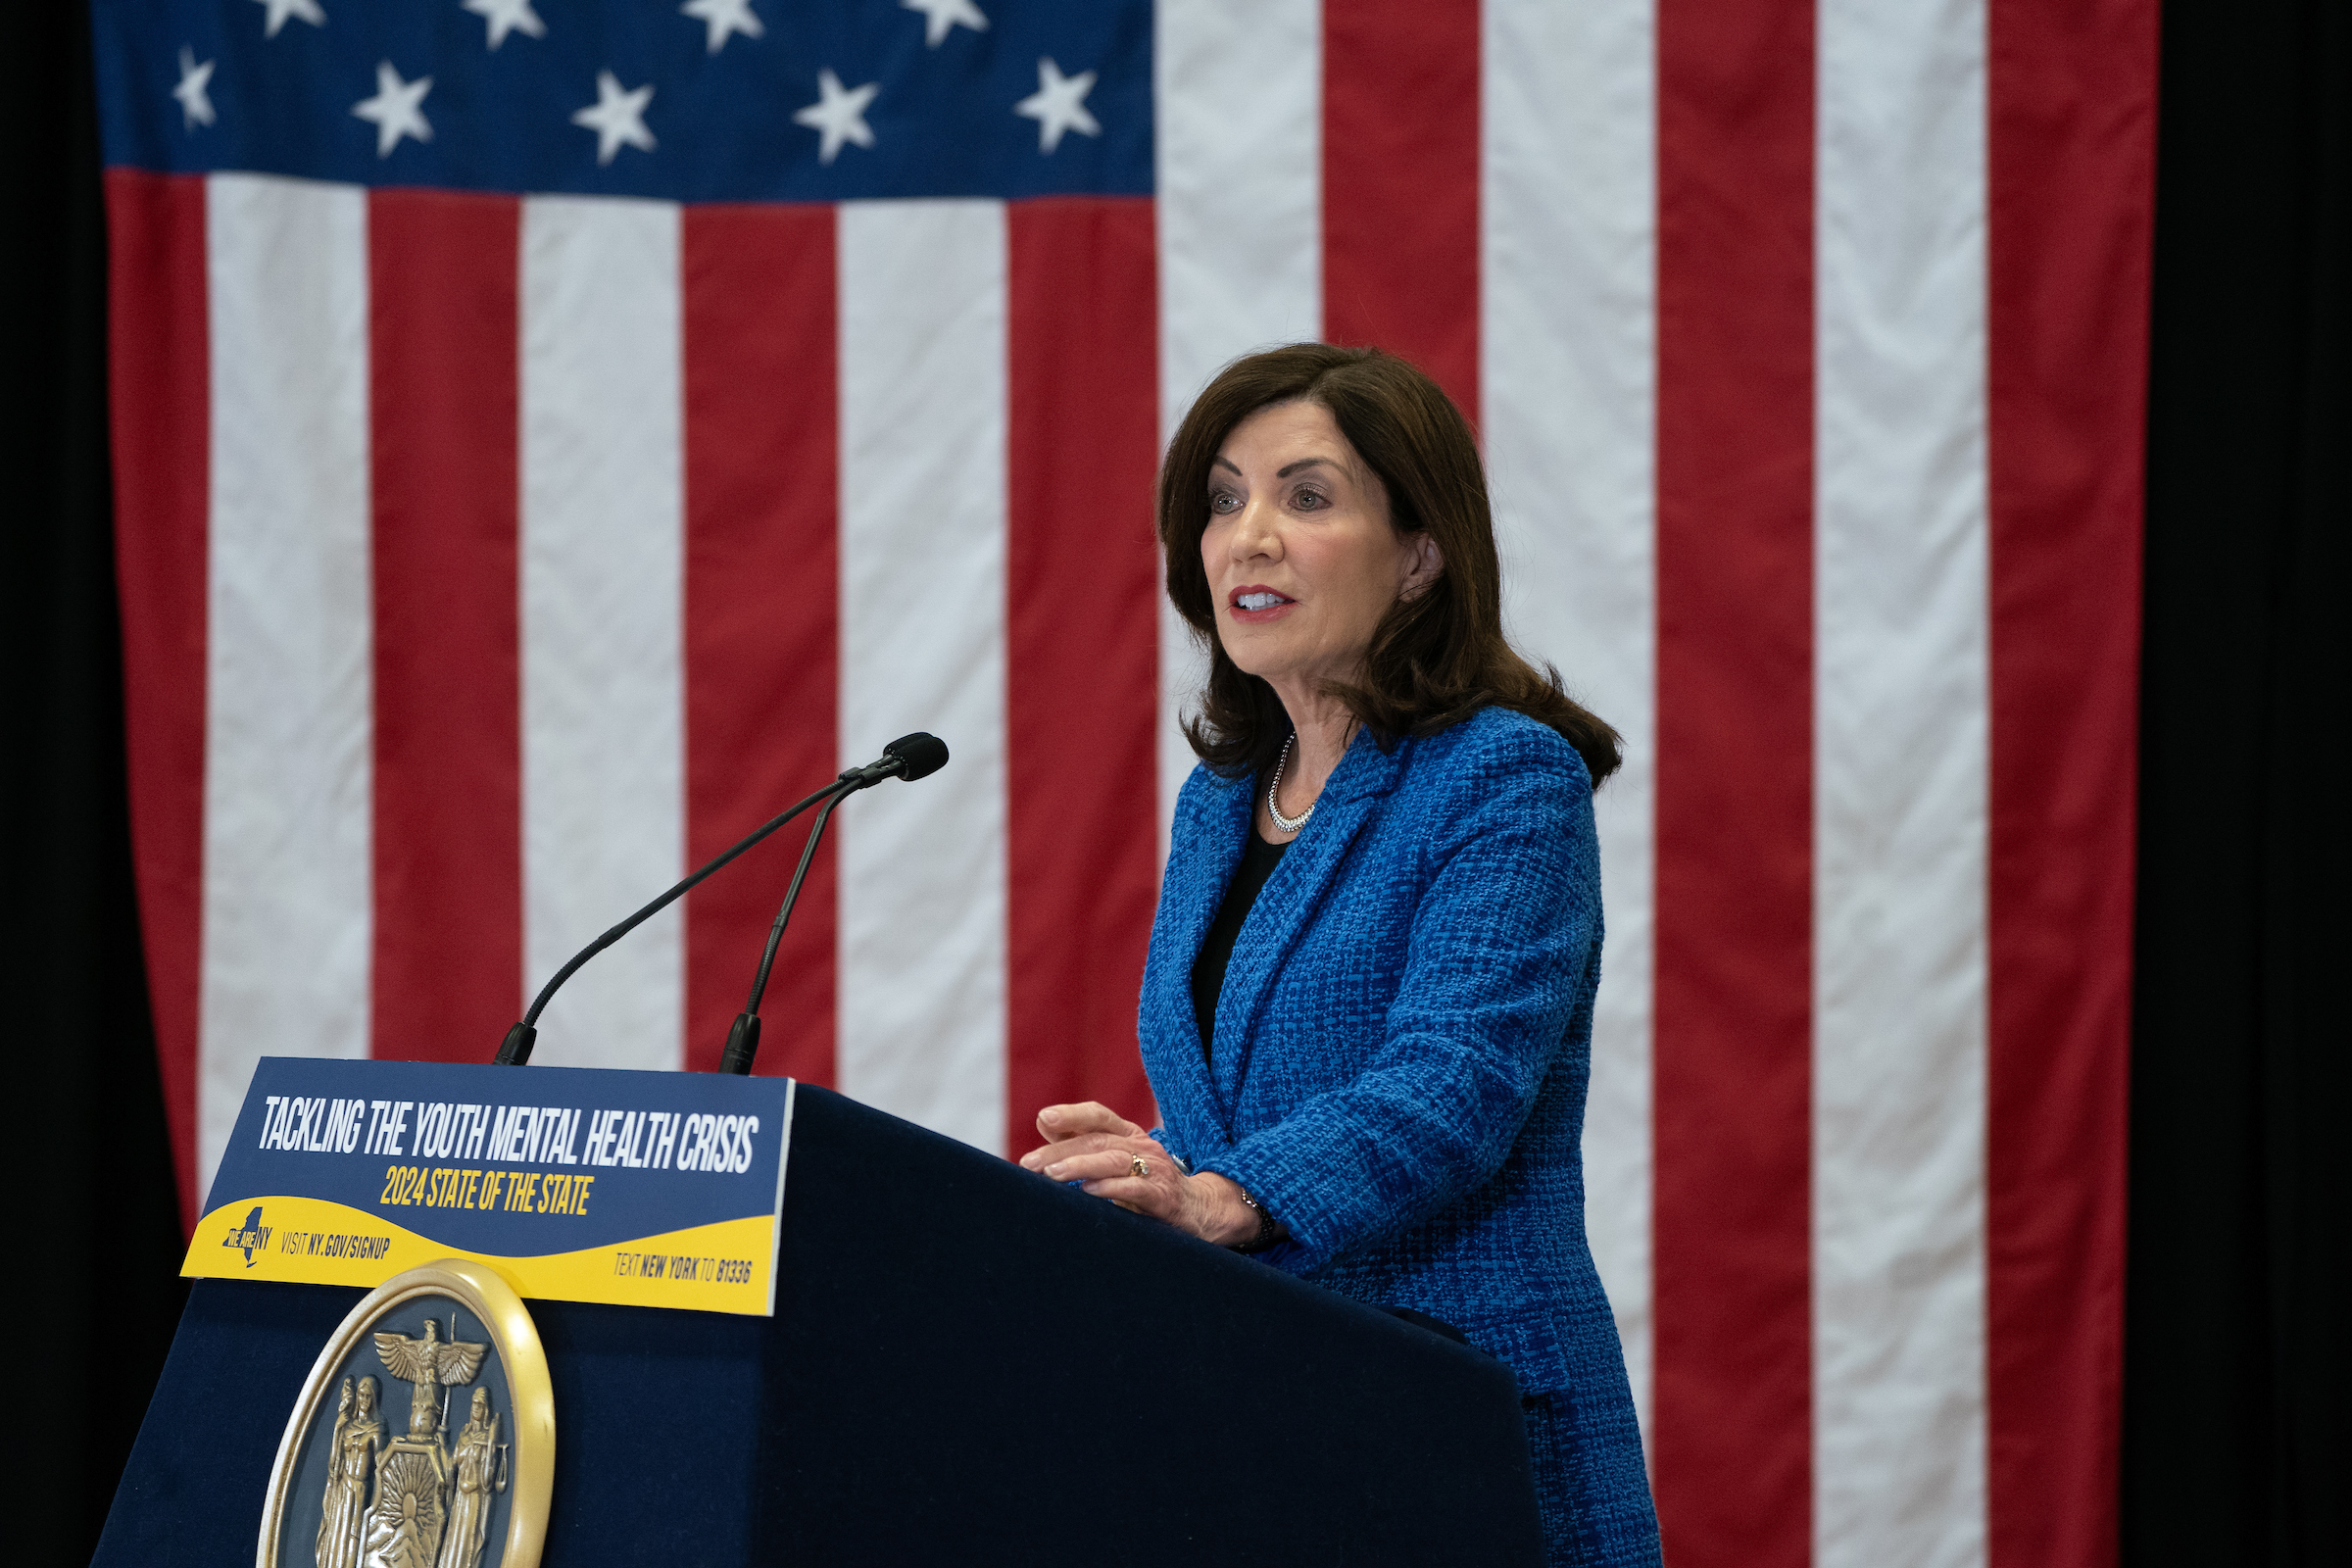 Gov. Kathy Hochul continued her focus on mental health at an event in the Bronx today.